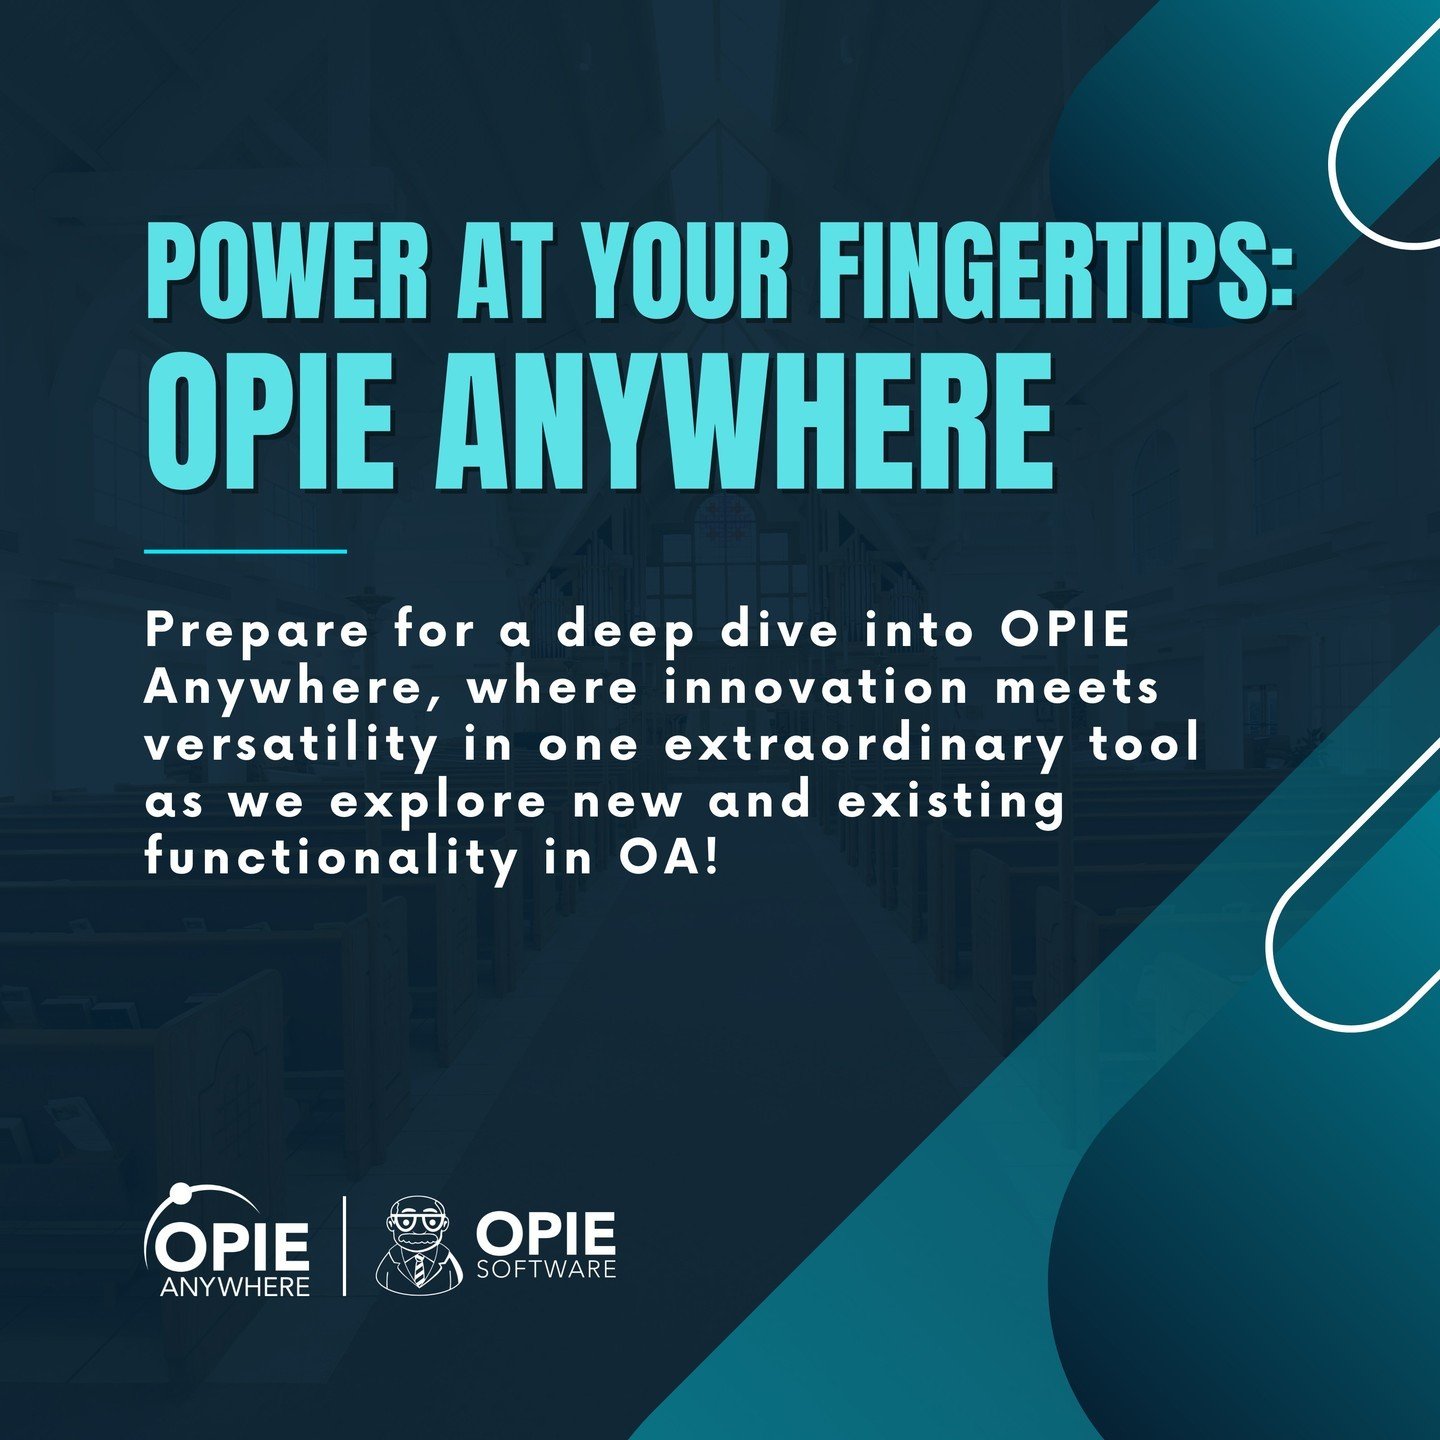 🚀 Power at your Fingertips with OPIE Anywhere! 🌟
Tomorrow, May 16, prepare for a deep dive into OPIE Anywhere where innovation meets versatility in one extraordinary tool! 💫
💡 Explore patient notes, effortlessly edit code selections, and seamless